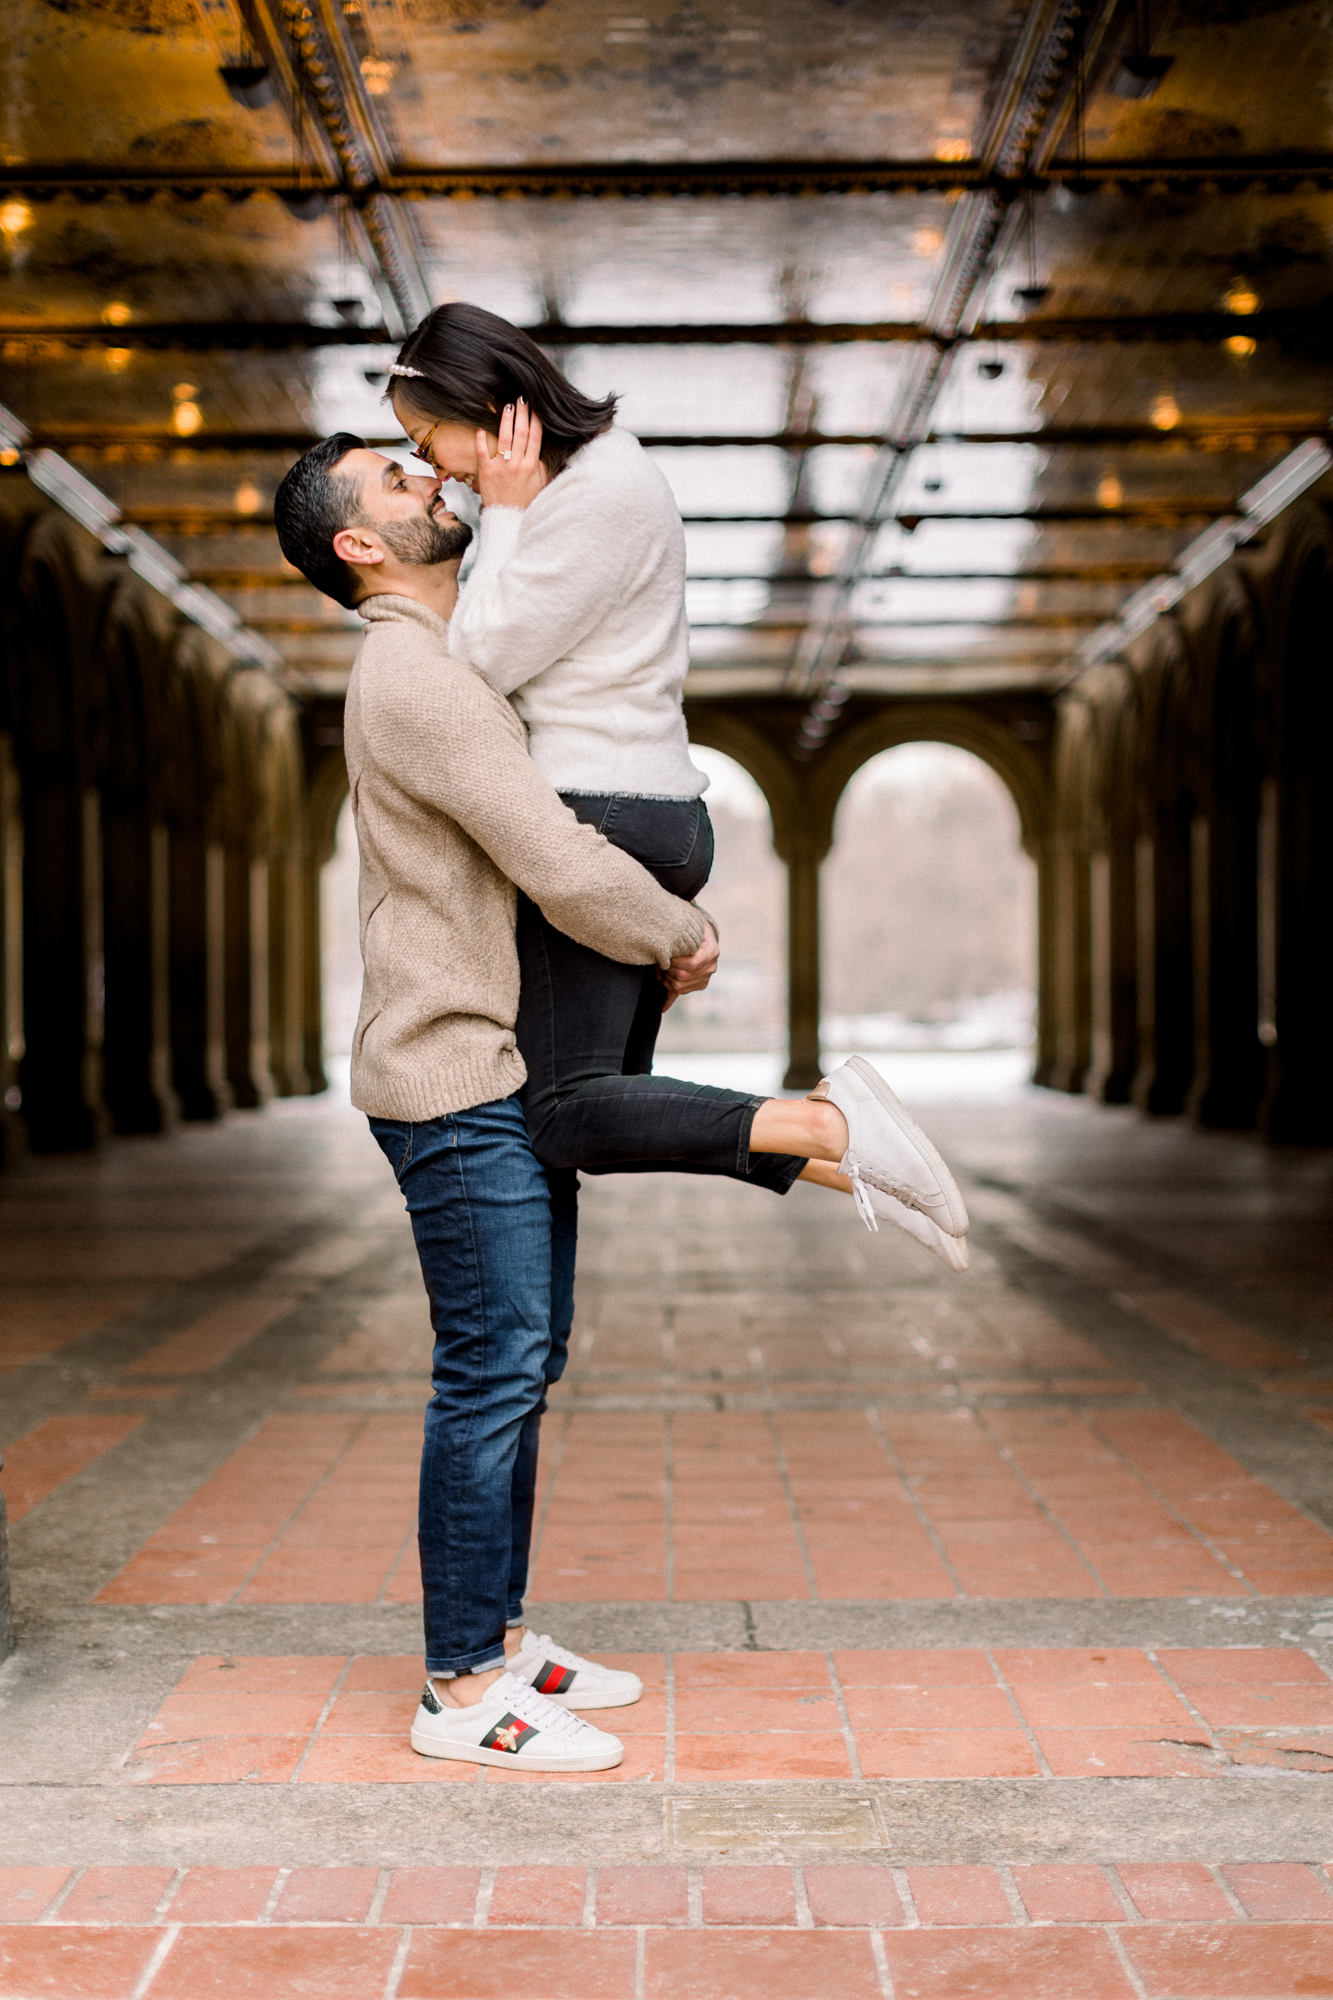 Playful and Romantic Winter Engagement Photos in Central Park NYC